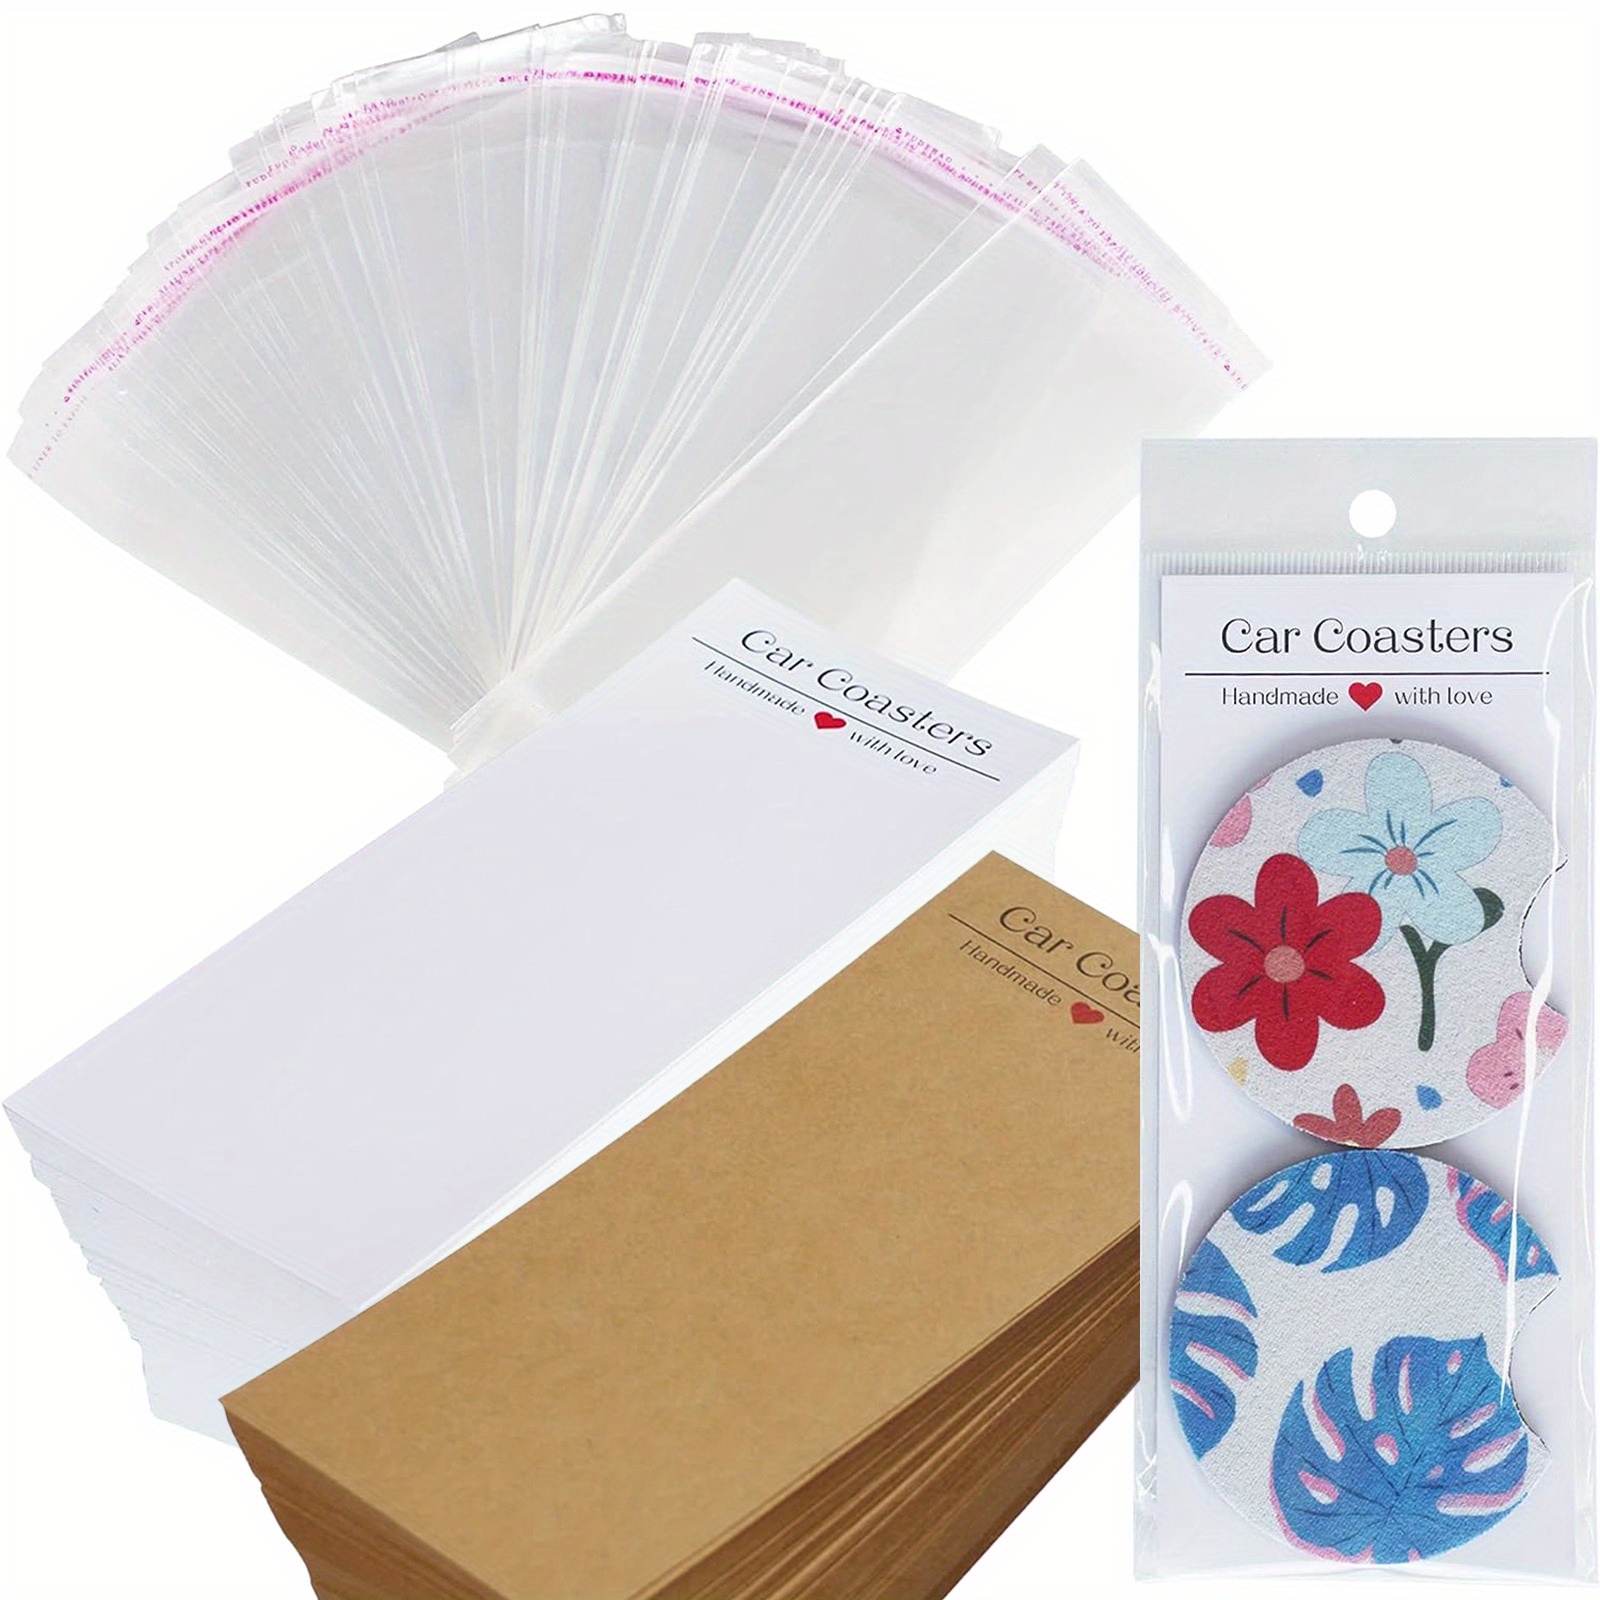 100Pcs Car Coaster Packaging for Selling, Car Coasters Sublimation Blanks  Sublimation Coasters, Sublimation Car Coaster Cards with 100Pcs Bags, Heat